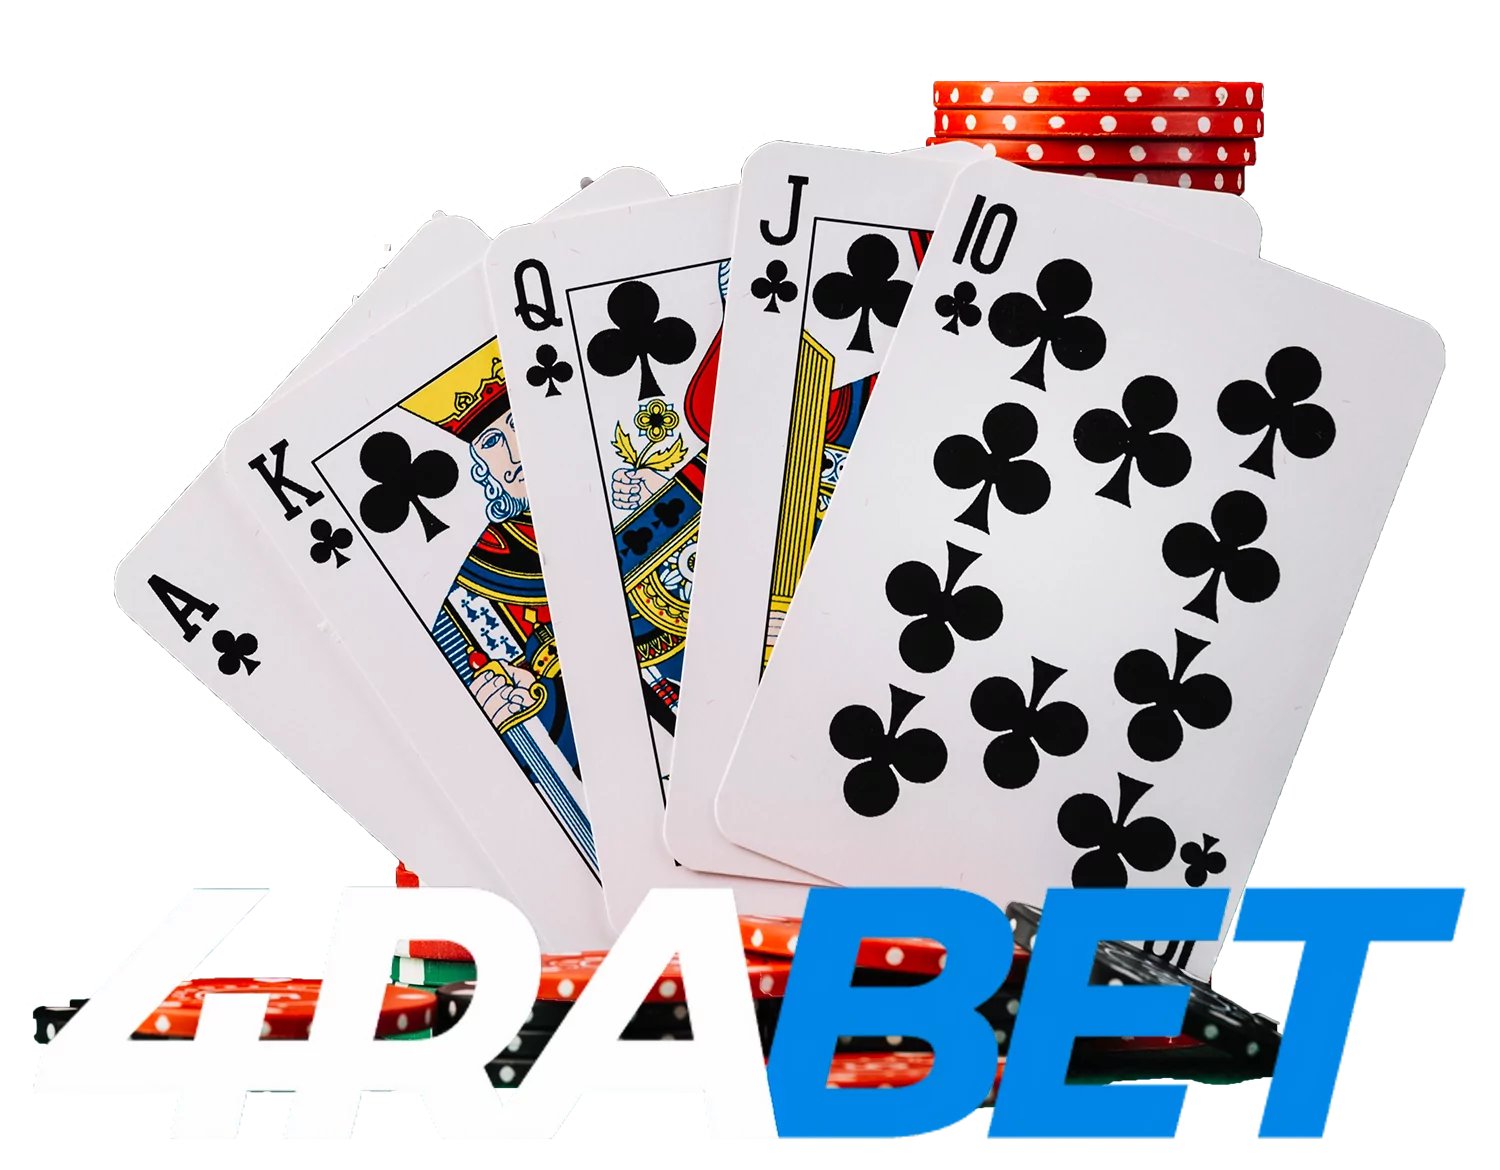 Sign up for 4rabet and enjoy slots and table games from the well-known providers.